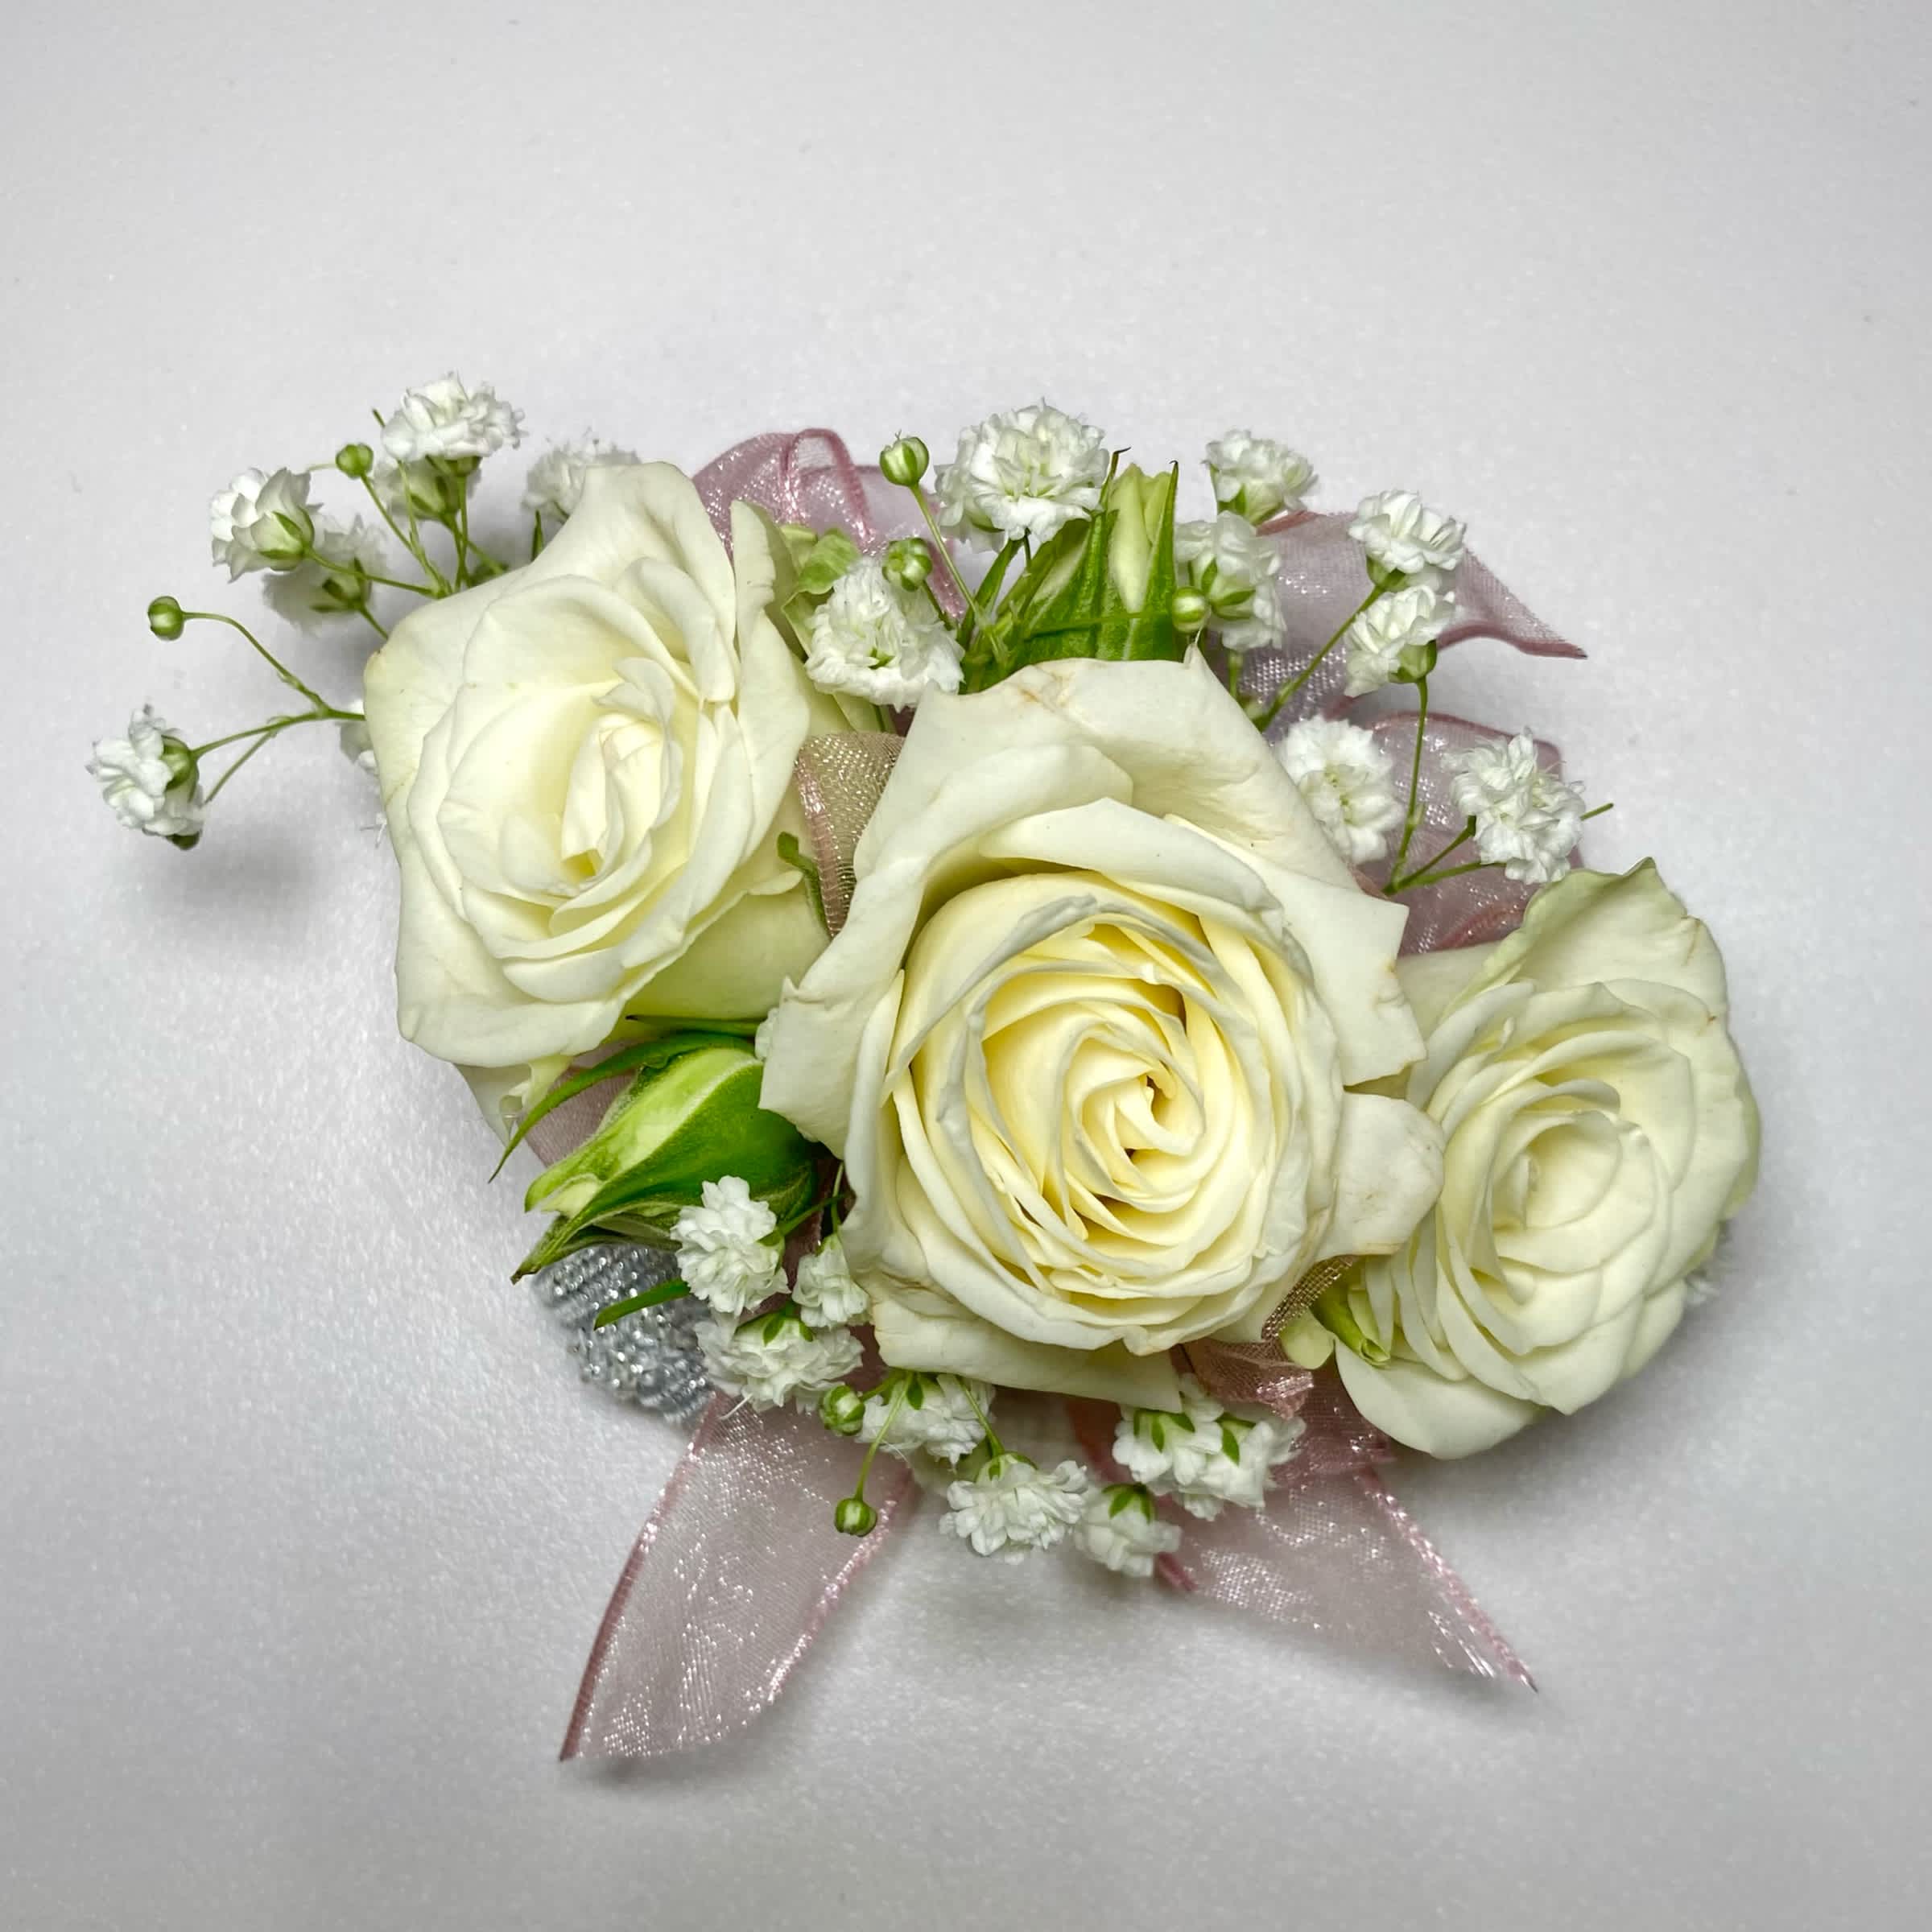 Light Pink/ Little Girl Wrist Corsage – Father/ Daughter Dance - This White Rose Wrist Corsage is made to fit the wrist of little girls between ages 2-12 years old. Includes White Spray Roses, White Filler Flower, Gentle Greenery and a Light Pink Ribbon. Or as Similar as Possible.